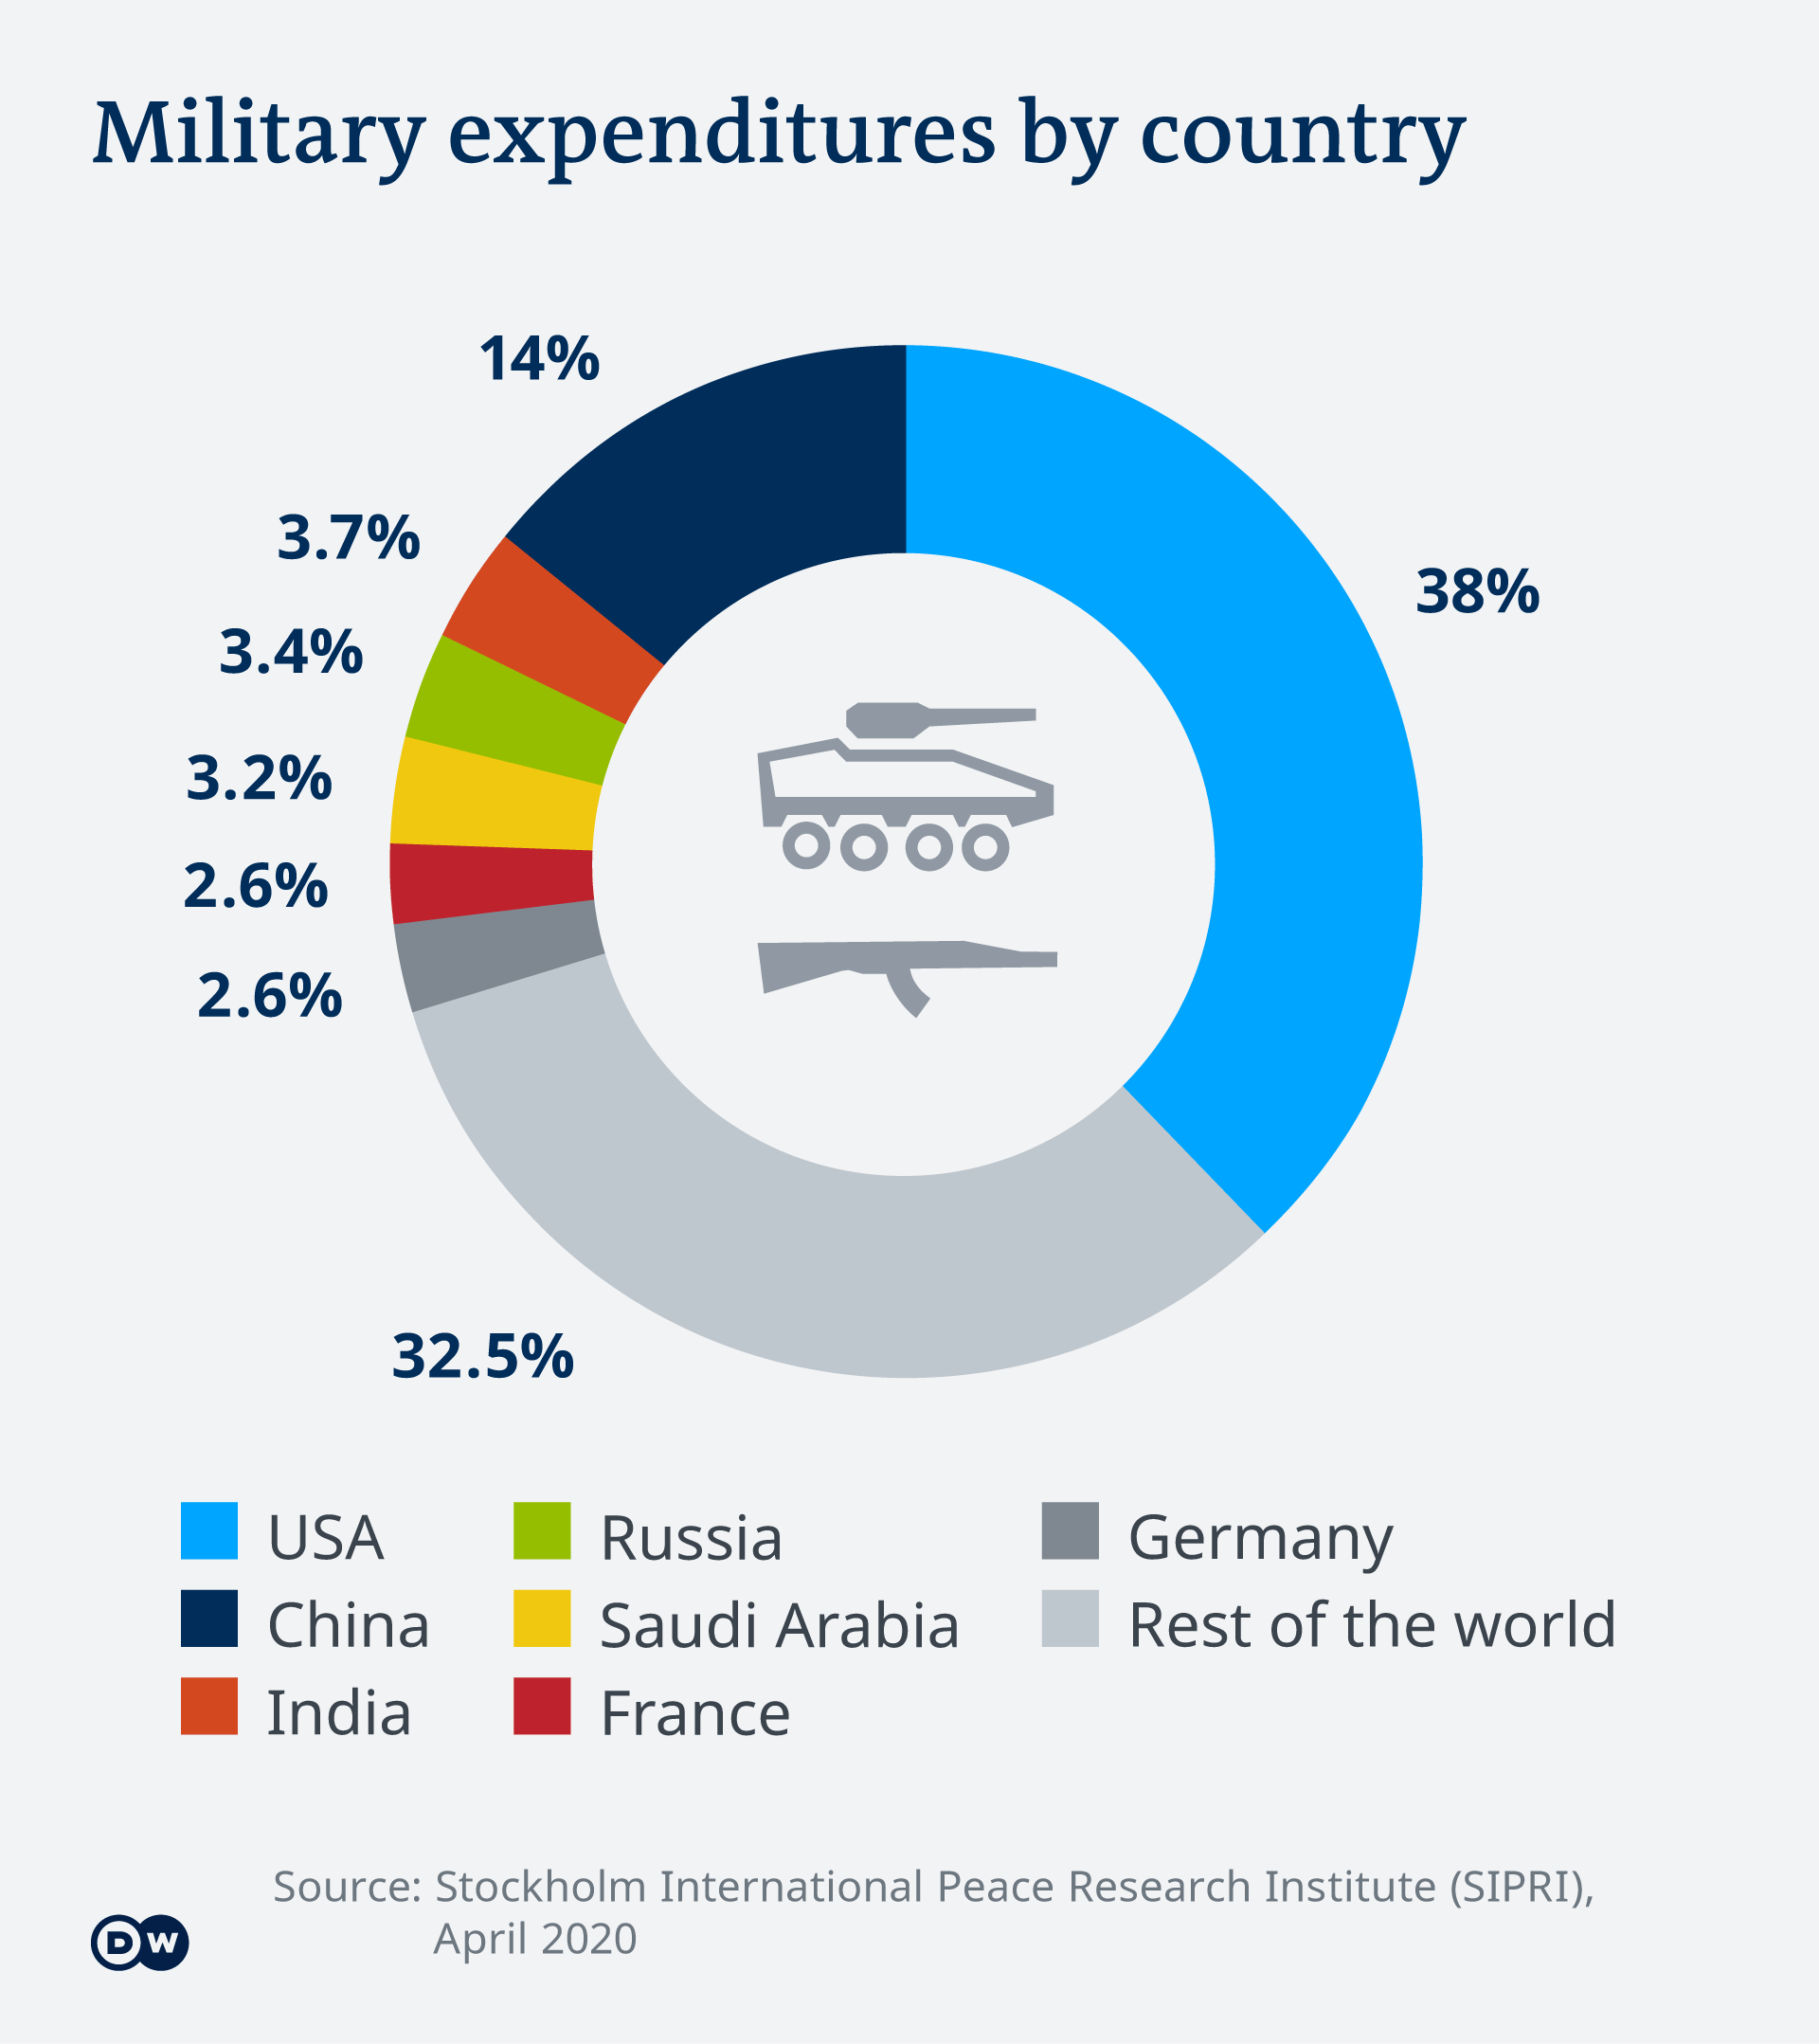 Infographic showing military expenditures by country